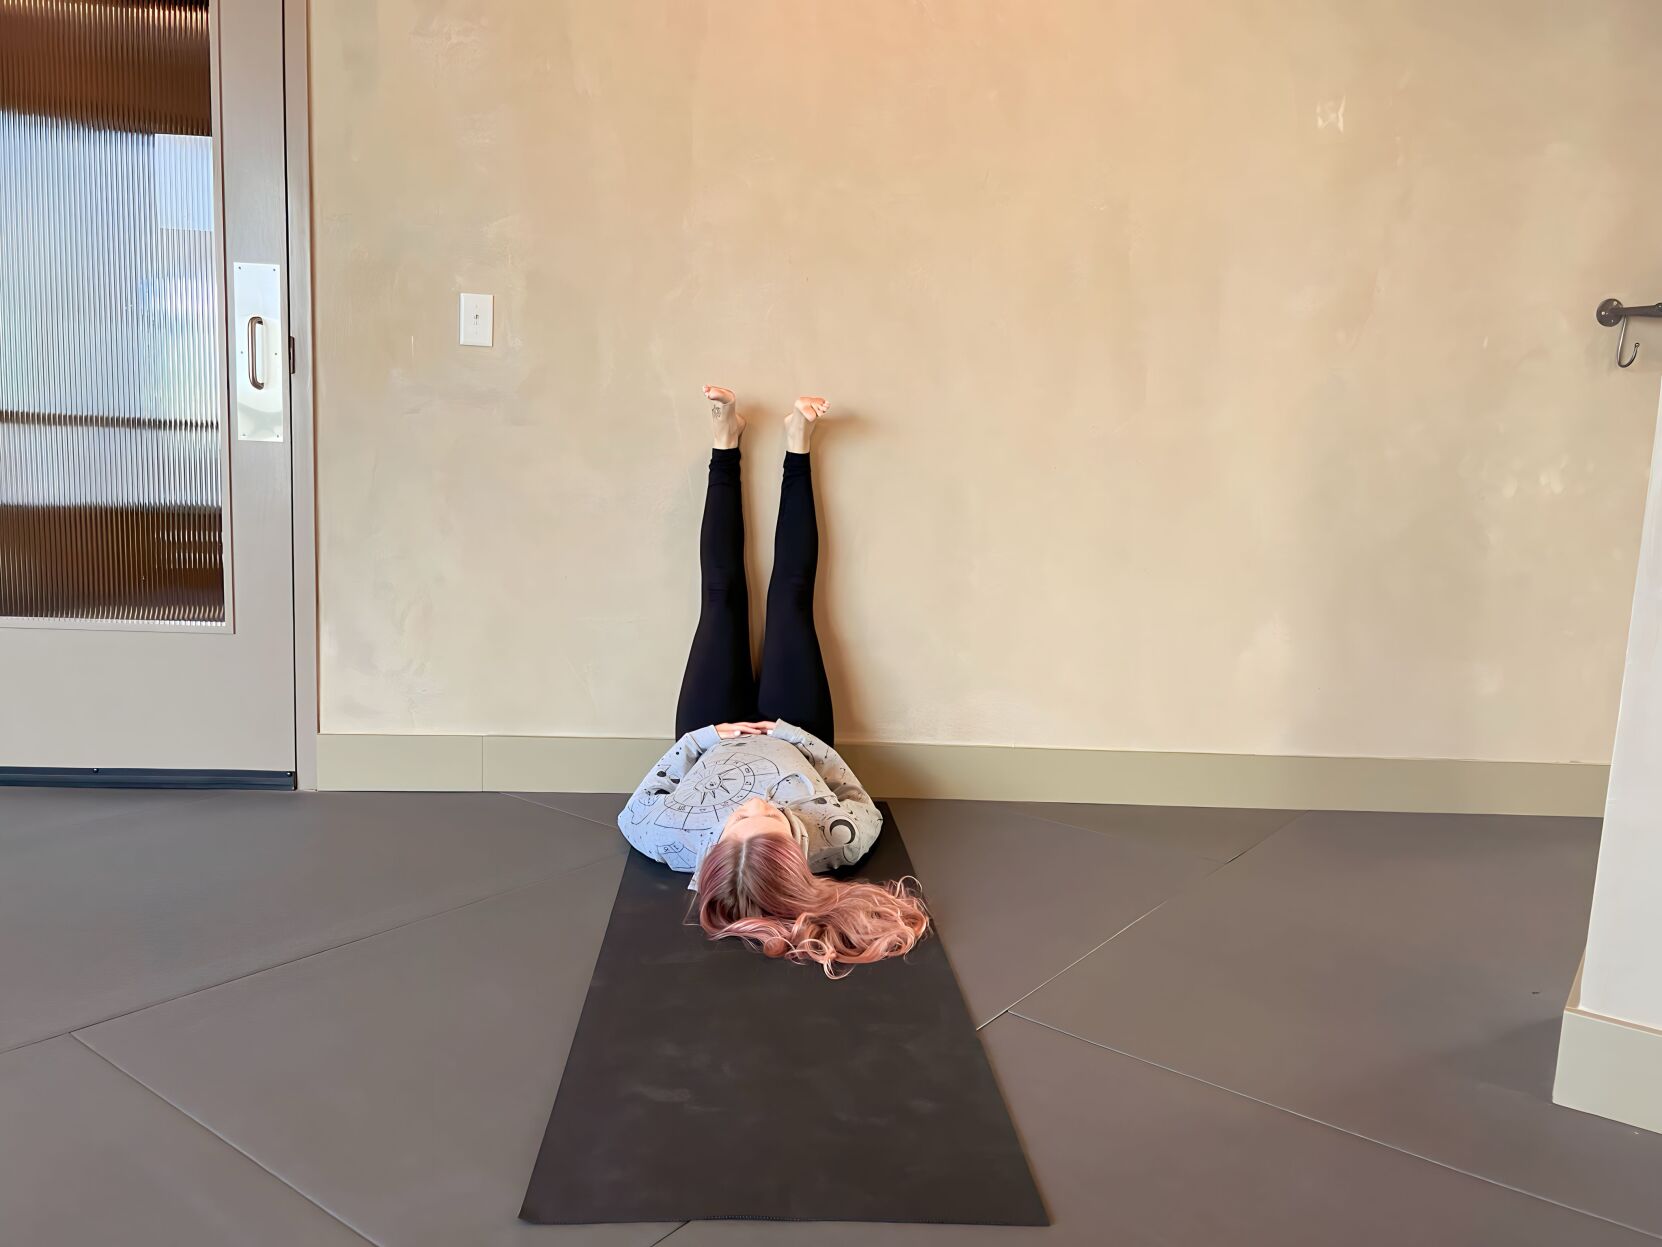 Legs Up the Wall: for deep rest and rejuvenation - HUM